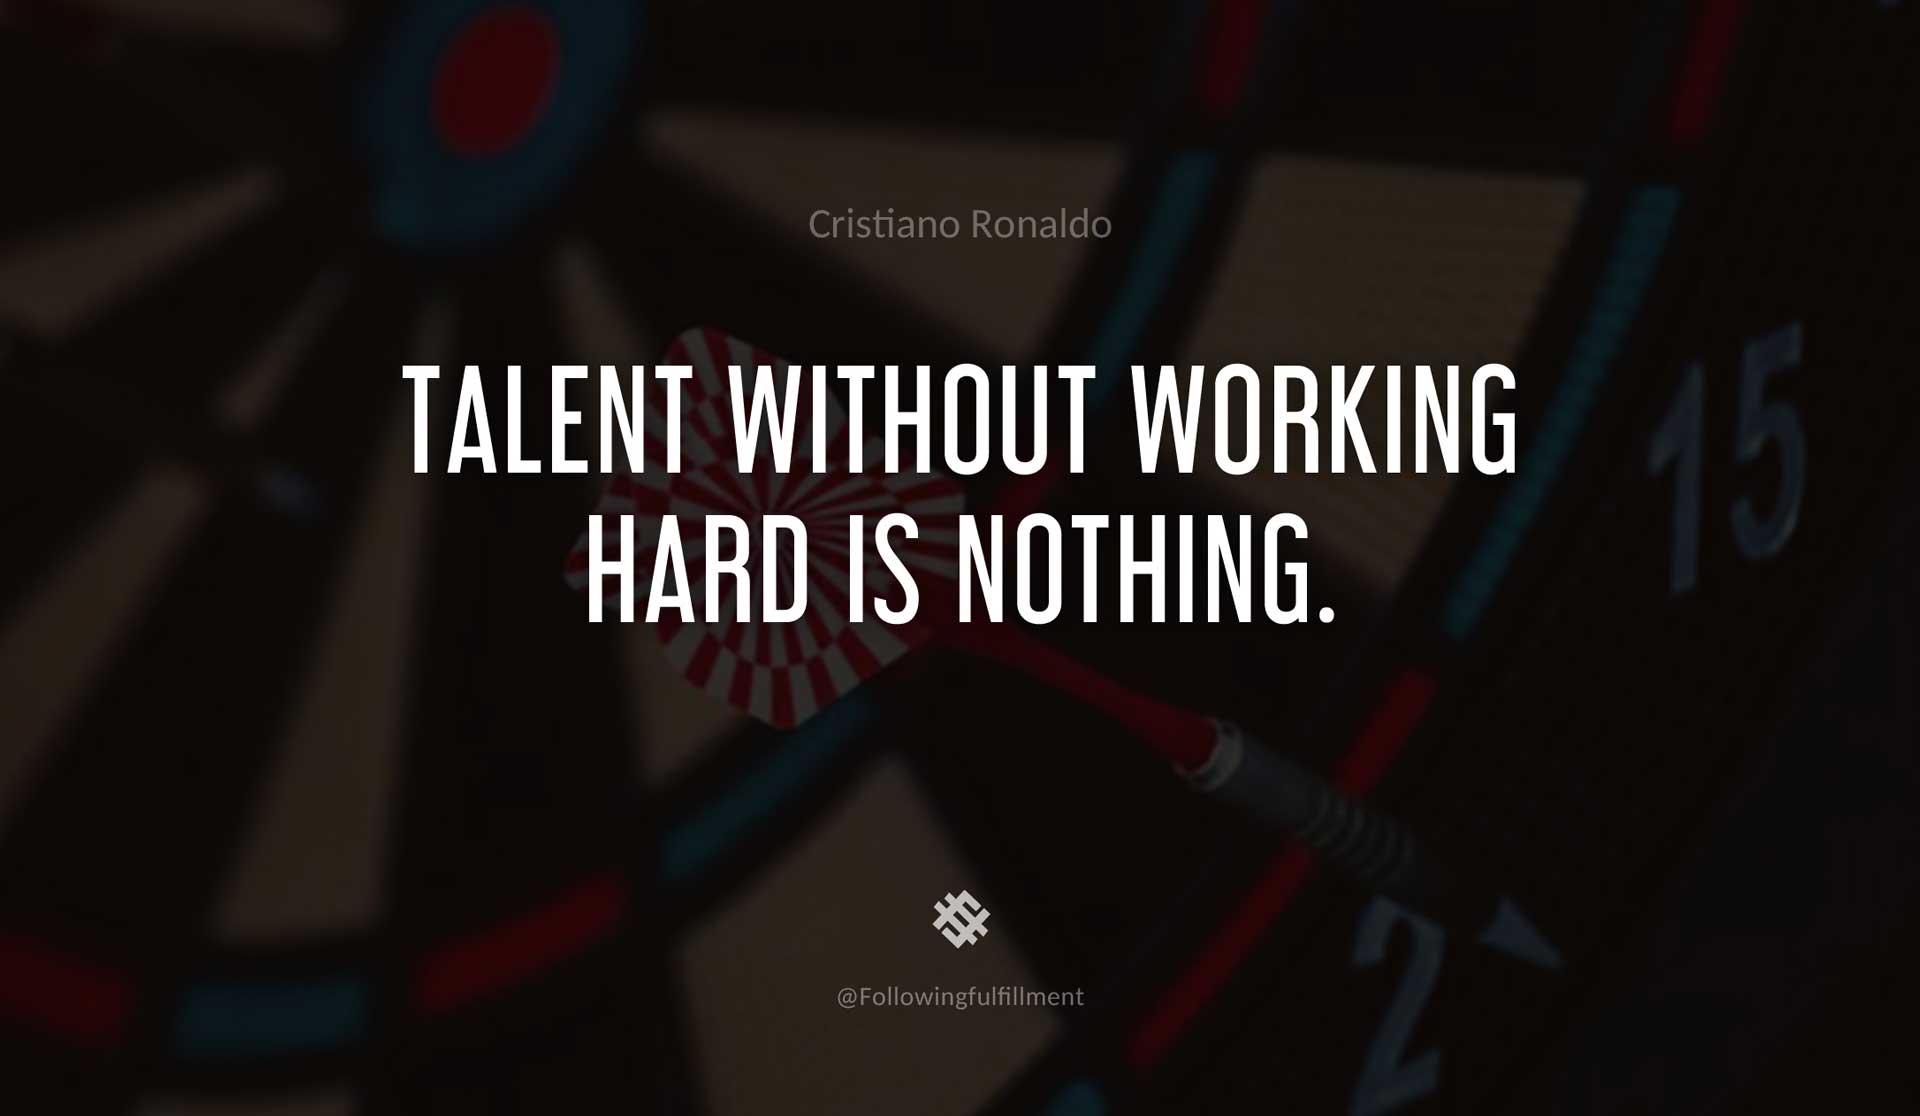 Talent-without-working-hard-is-nothing.-CRISTIANO-RONALDO-Quote.jpg